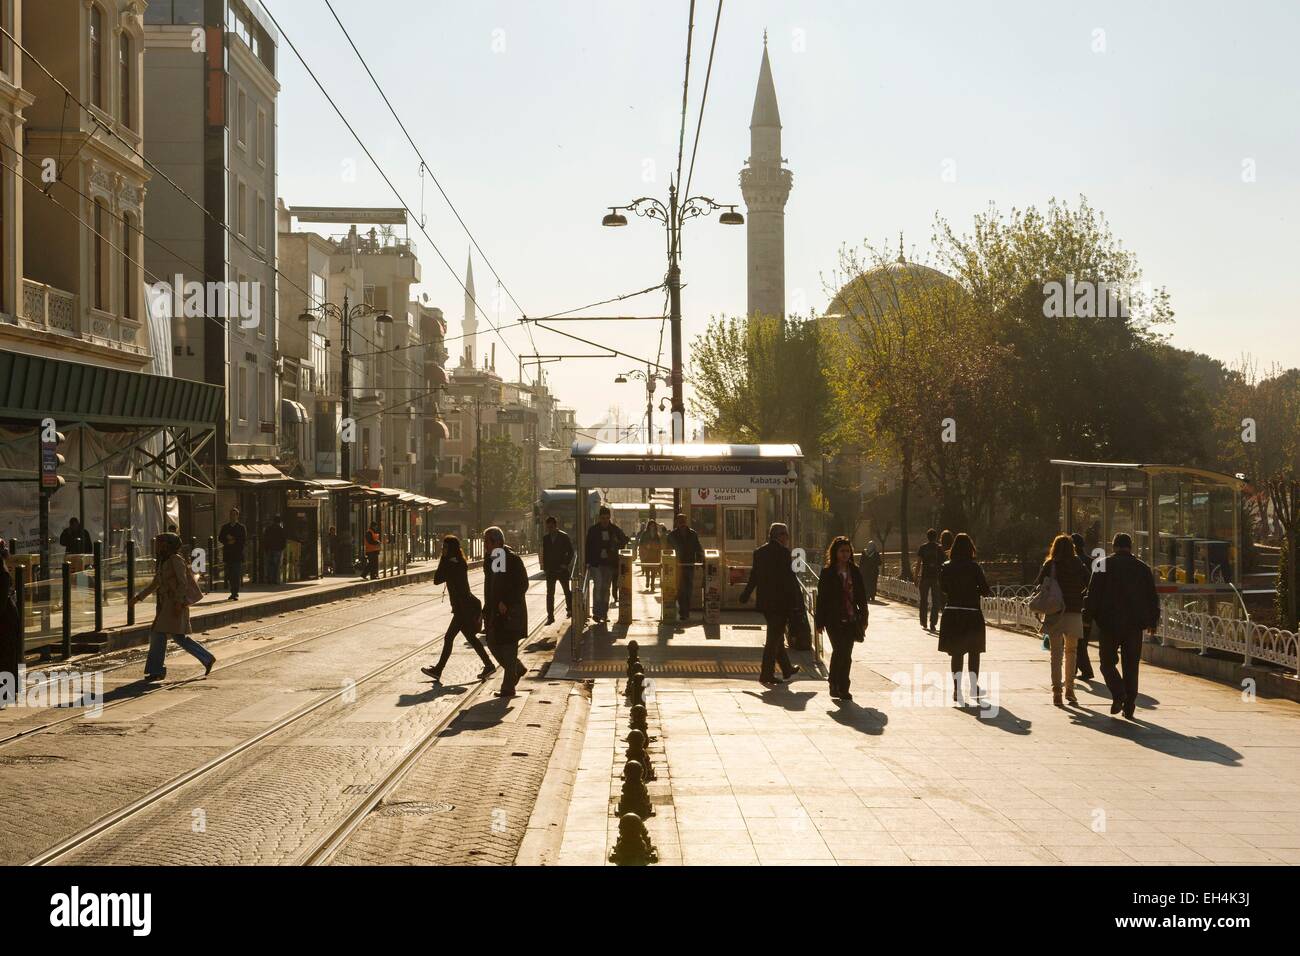 Turkey, Istanbul, users crossing the tram line at the Sultanahmet stop against the light Stock Photo